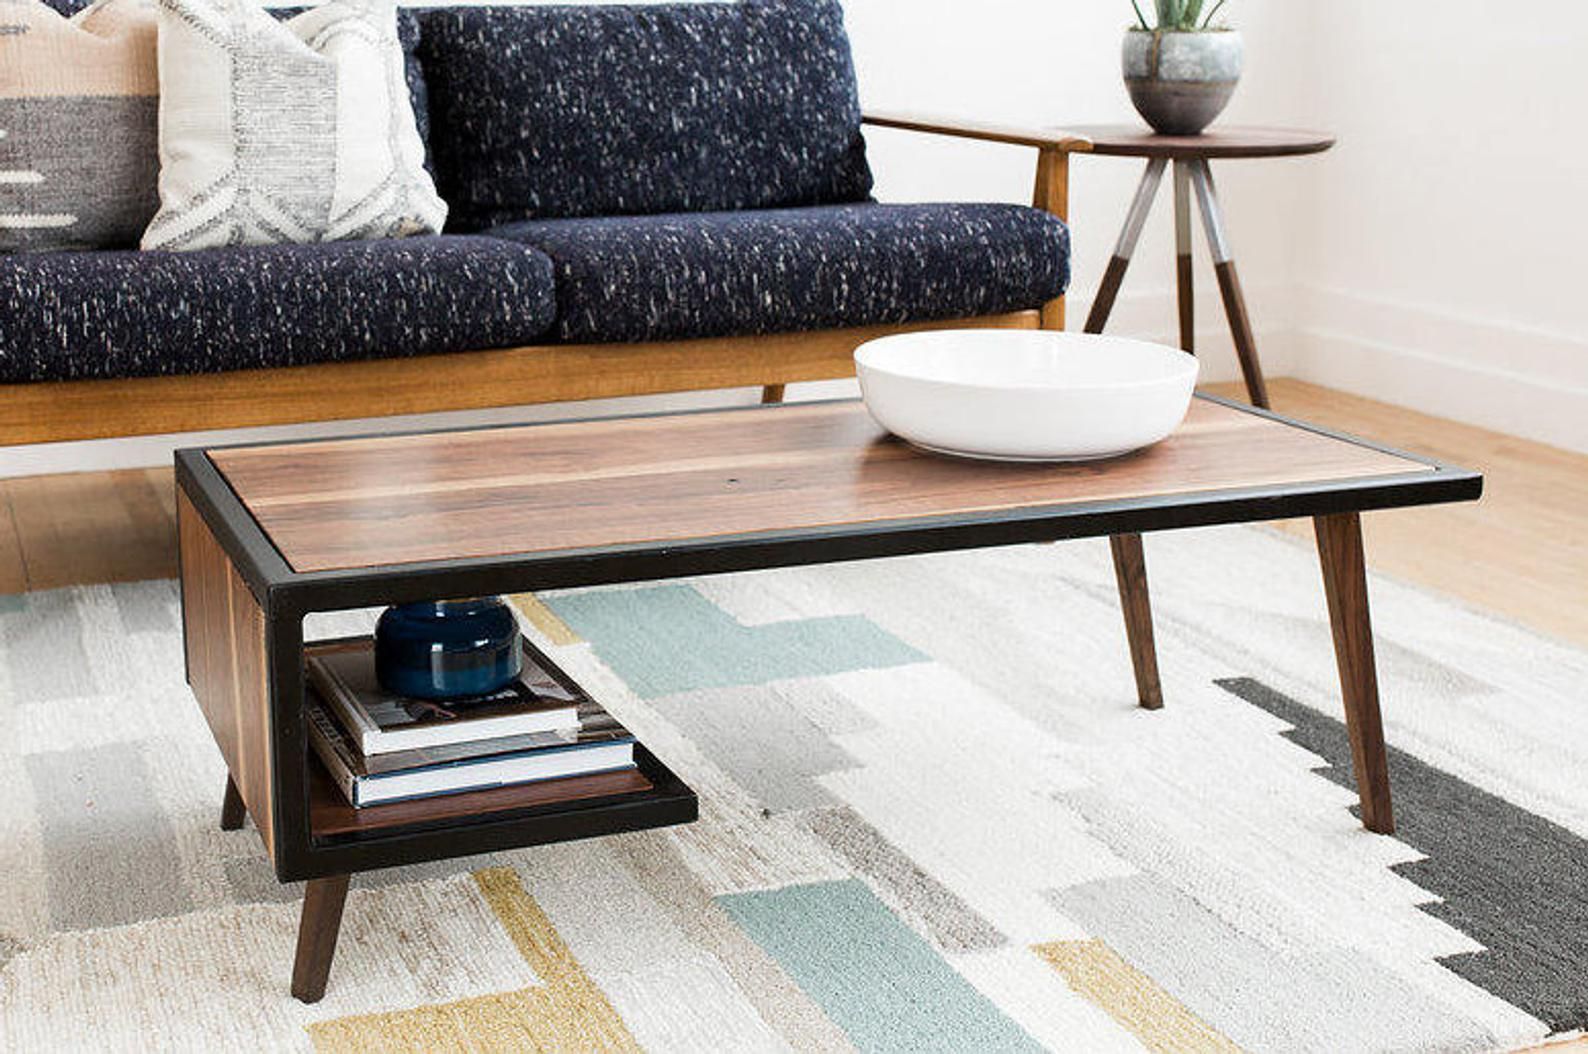 Mid Century Modern Style Coffee Tables You'll Love – Home With Regard To Mid Century Modern Coffee Tables (View 9 of 15)